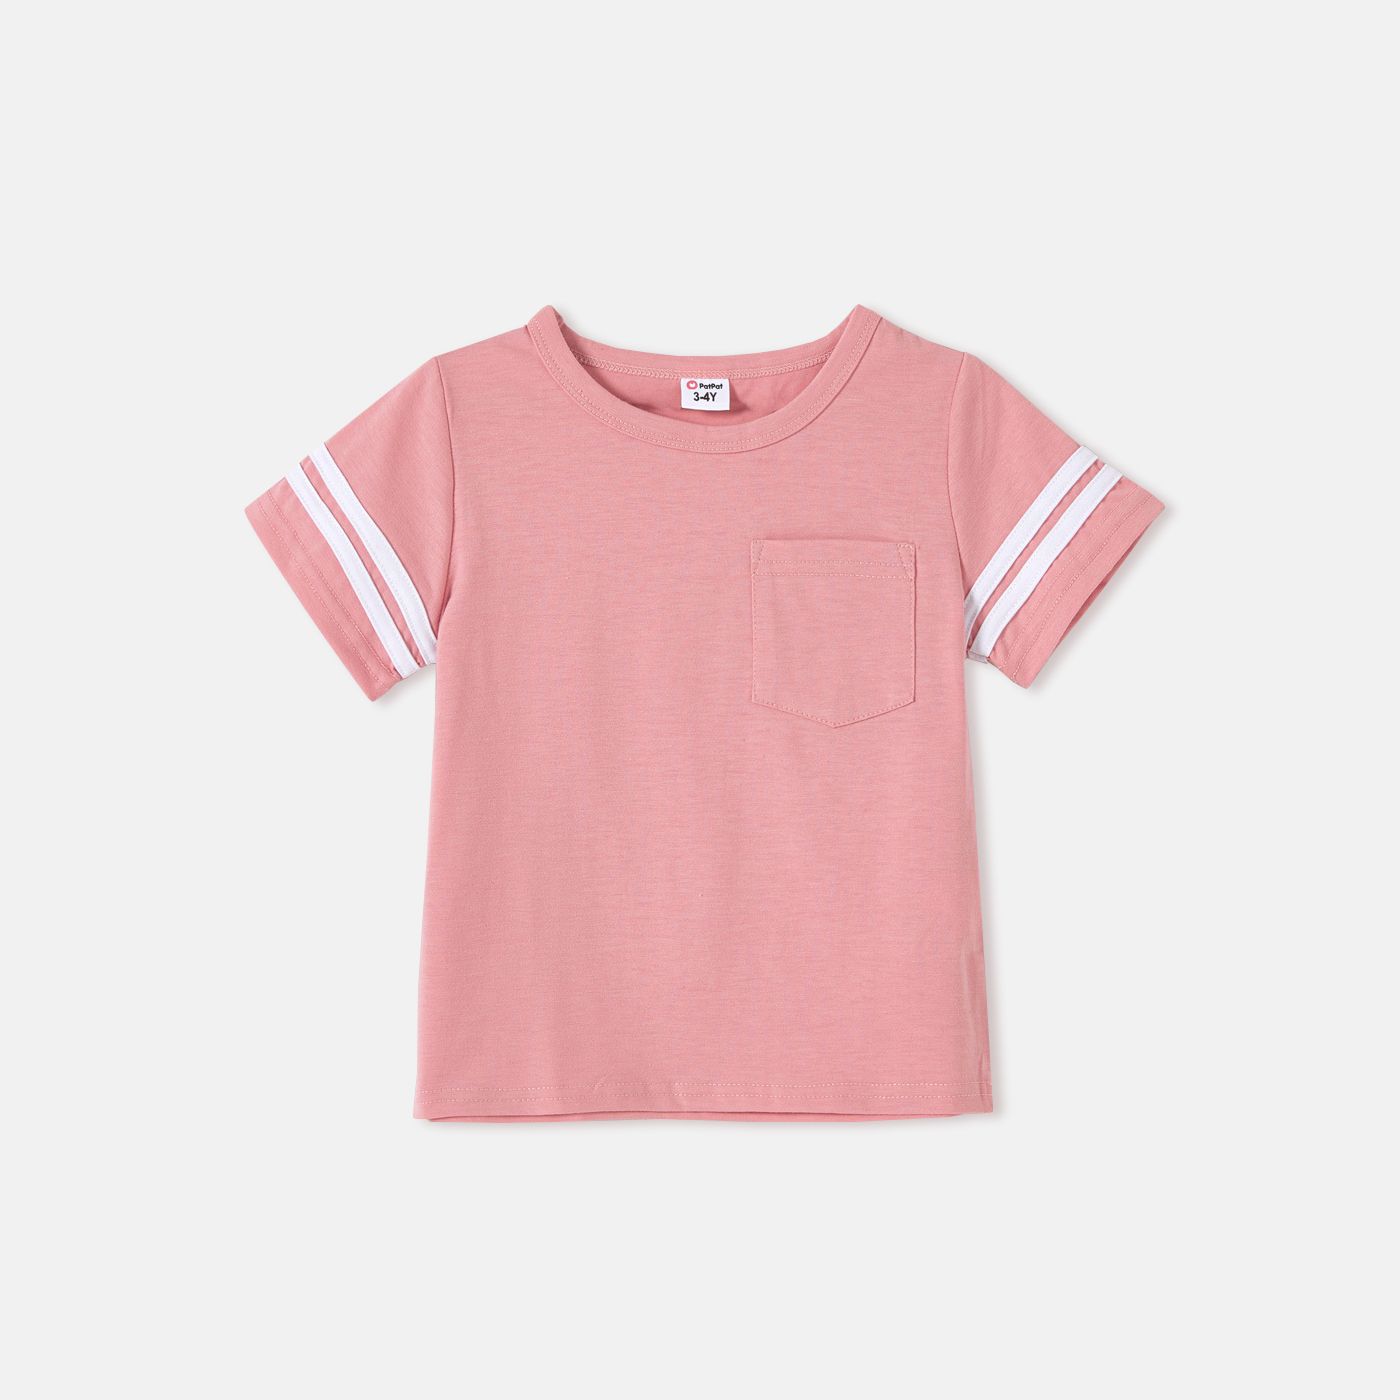 Family Matching Cotton Short-sleeve T-shirts and Pink Swiss Dot Lace Detail Flutter-sleeve Dresses S